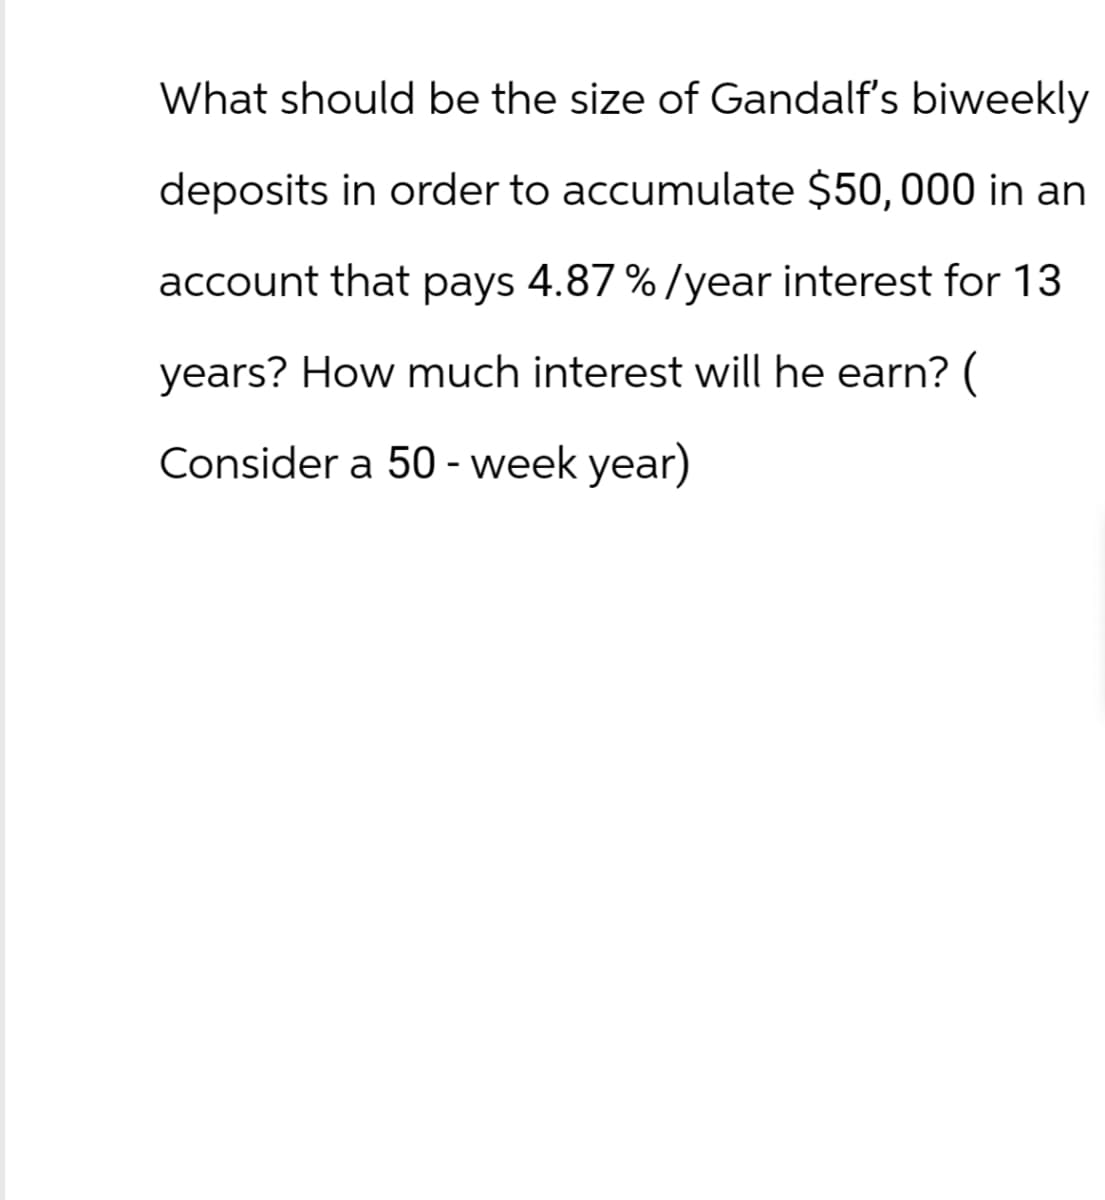 What should be the size of Gandalf's biweekly
deposits in order to accumulate $50,000 in an
account that pays 4.87 %/year interest for 13
years? How much interest will he earn? (
onsider a 50 - week year)